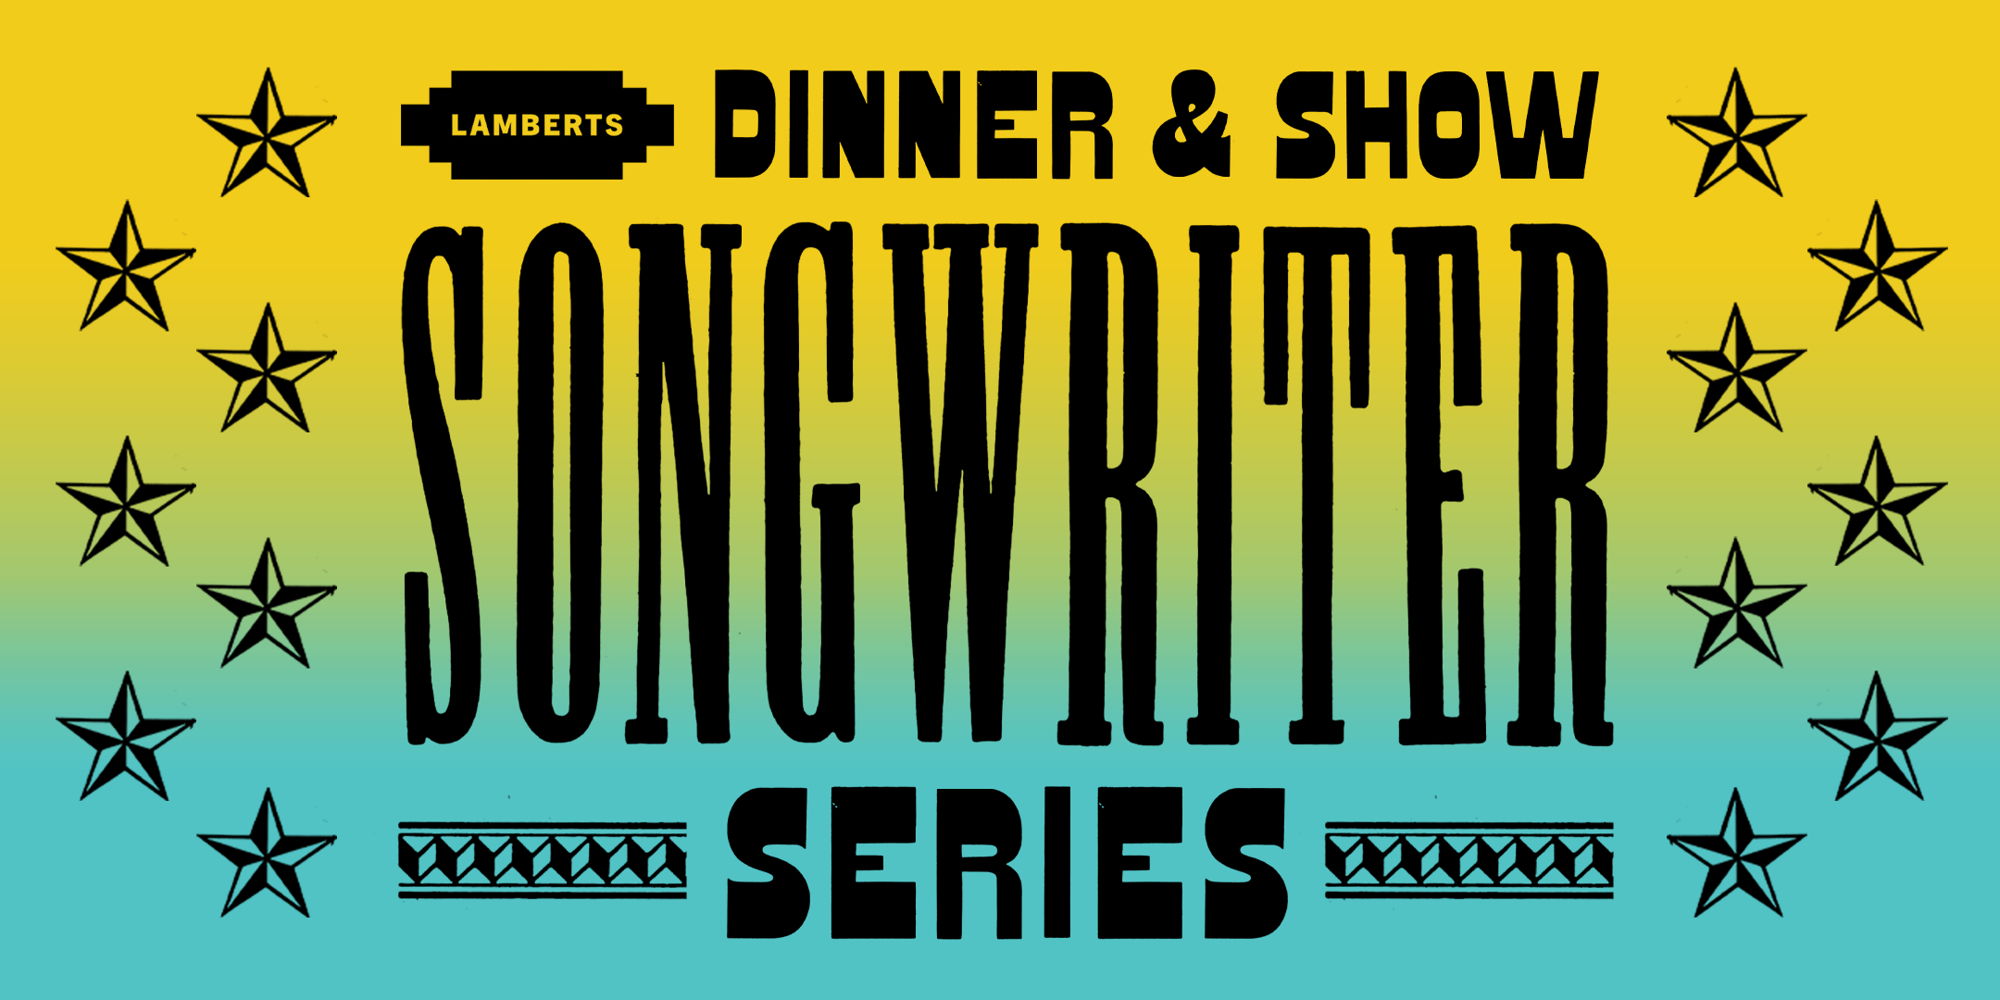 Dinner & Show Songwriter Series promotional image